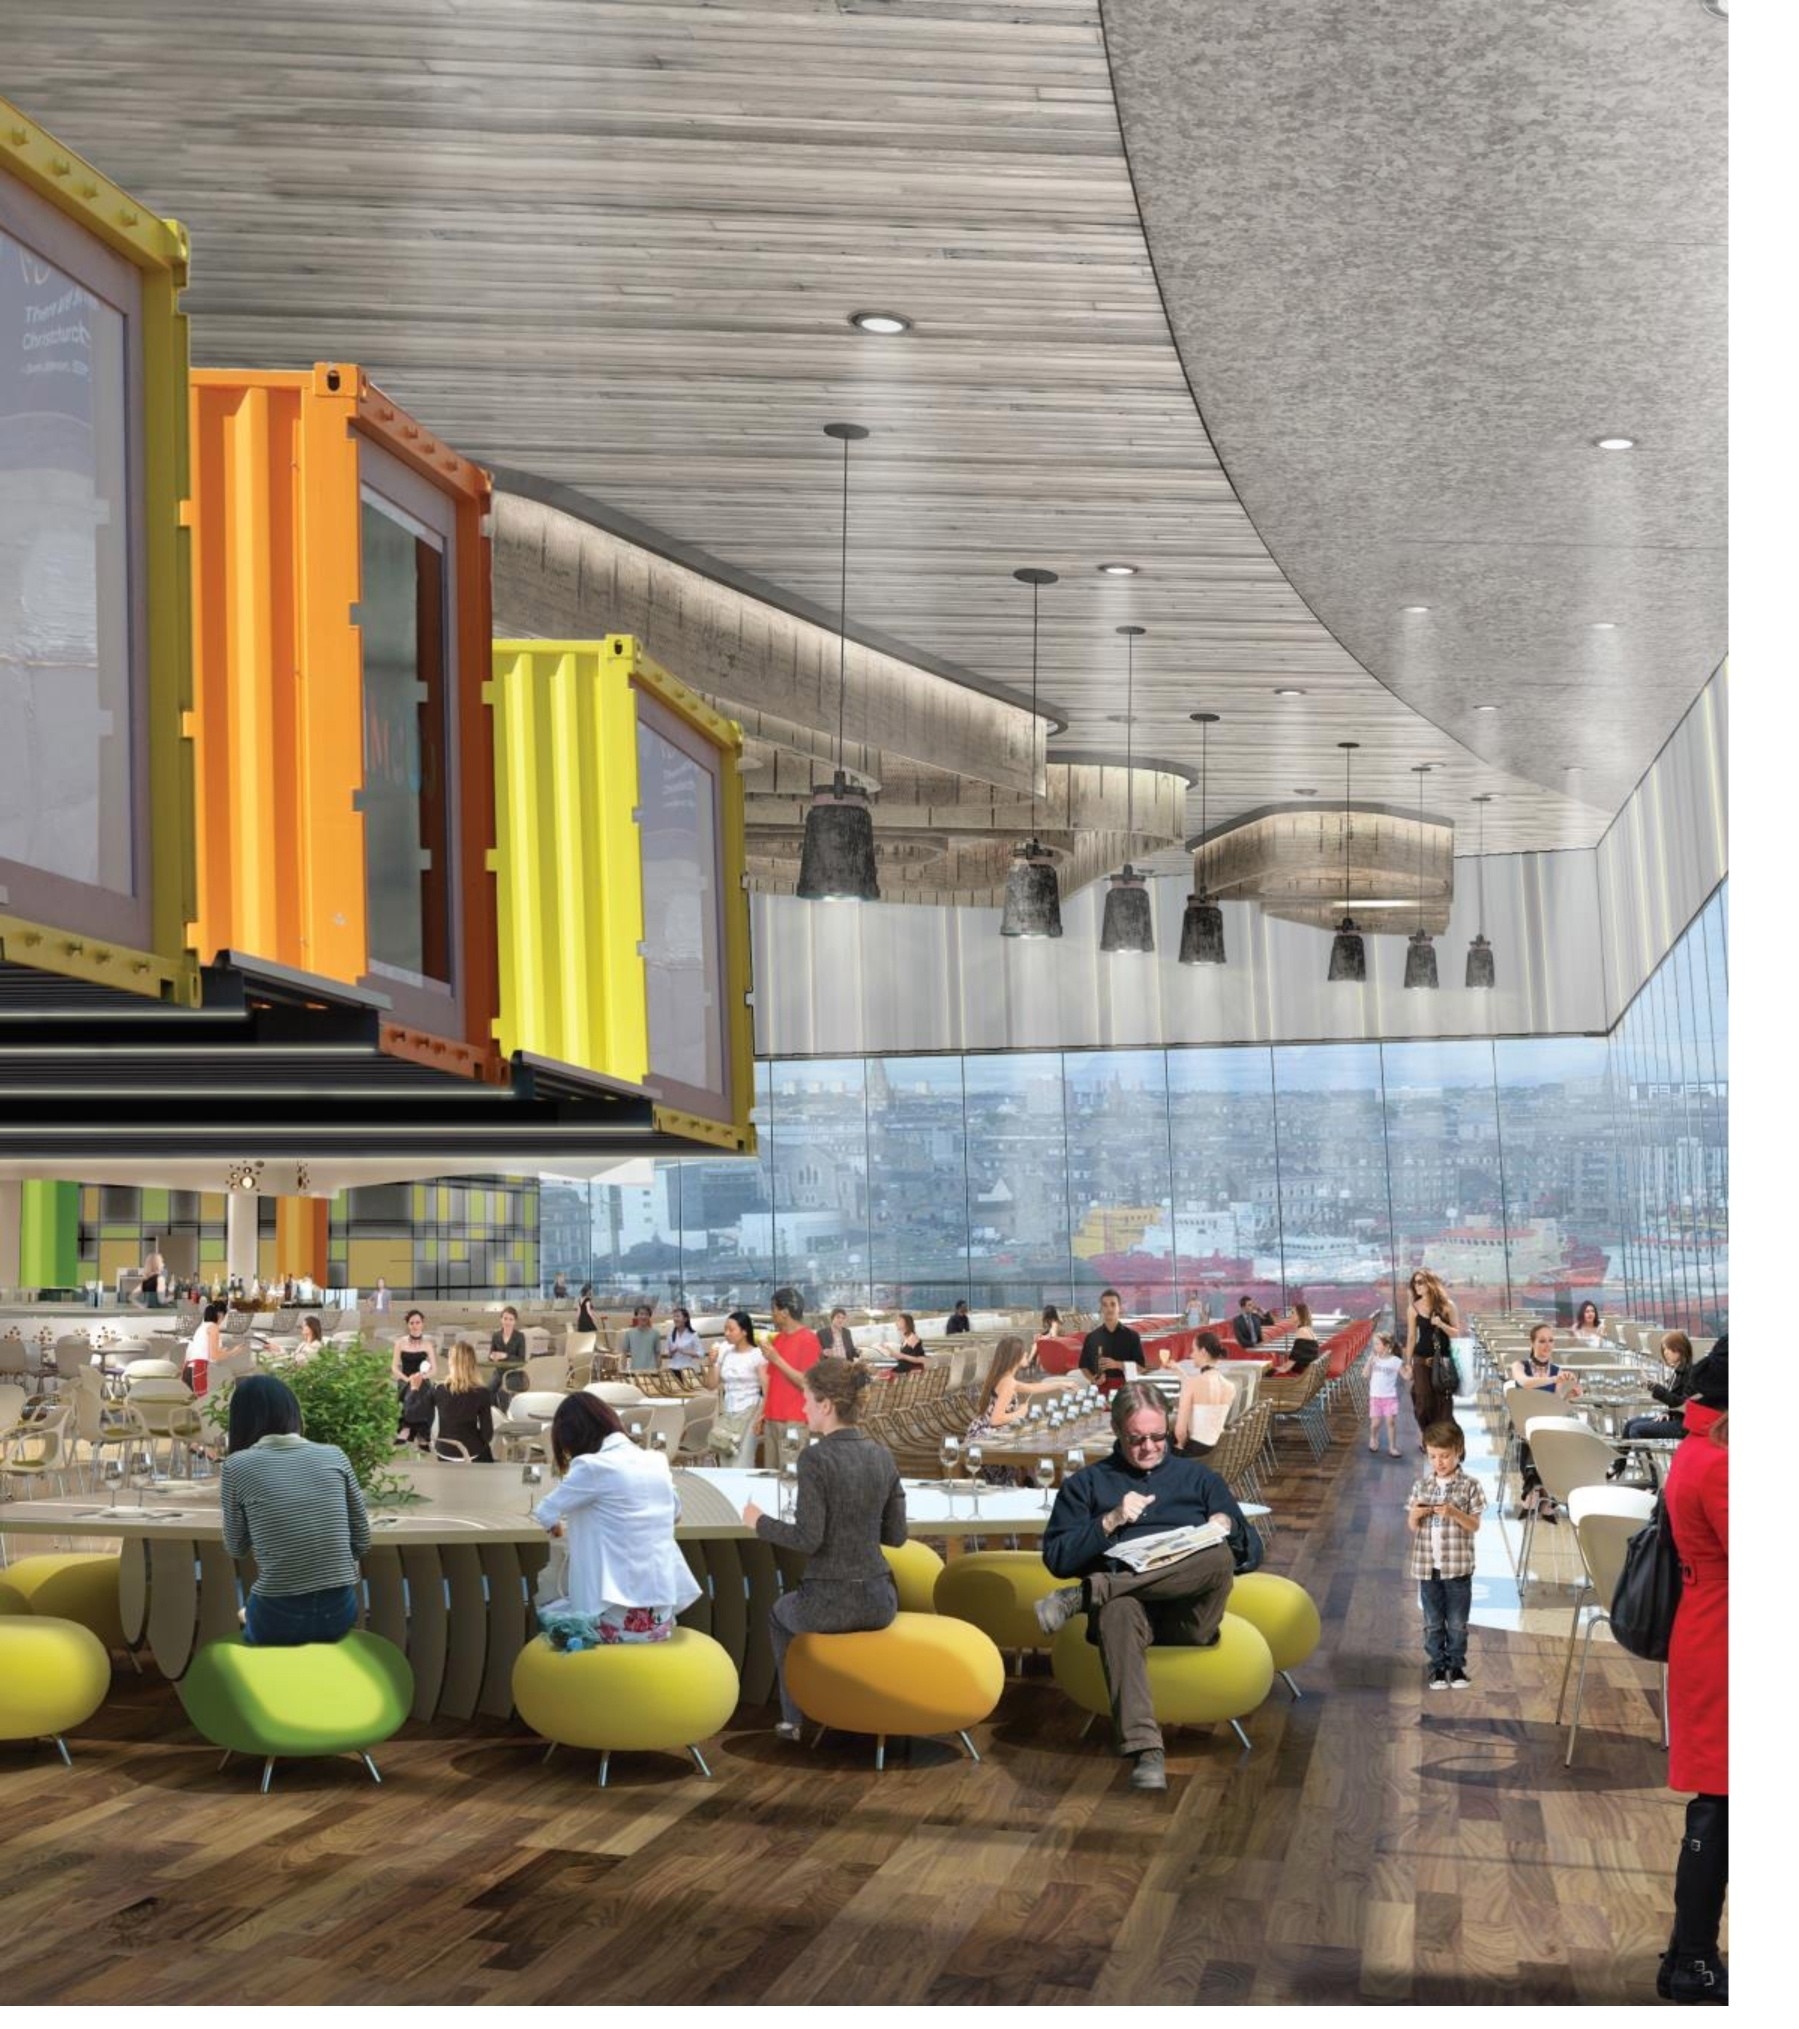 Artist impression of the planned revamp of Aberdeen's Union Square. This image shows an propsed food court Submitted 